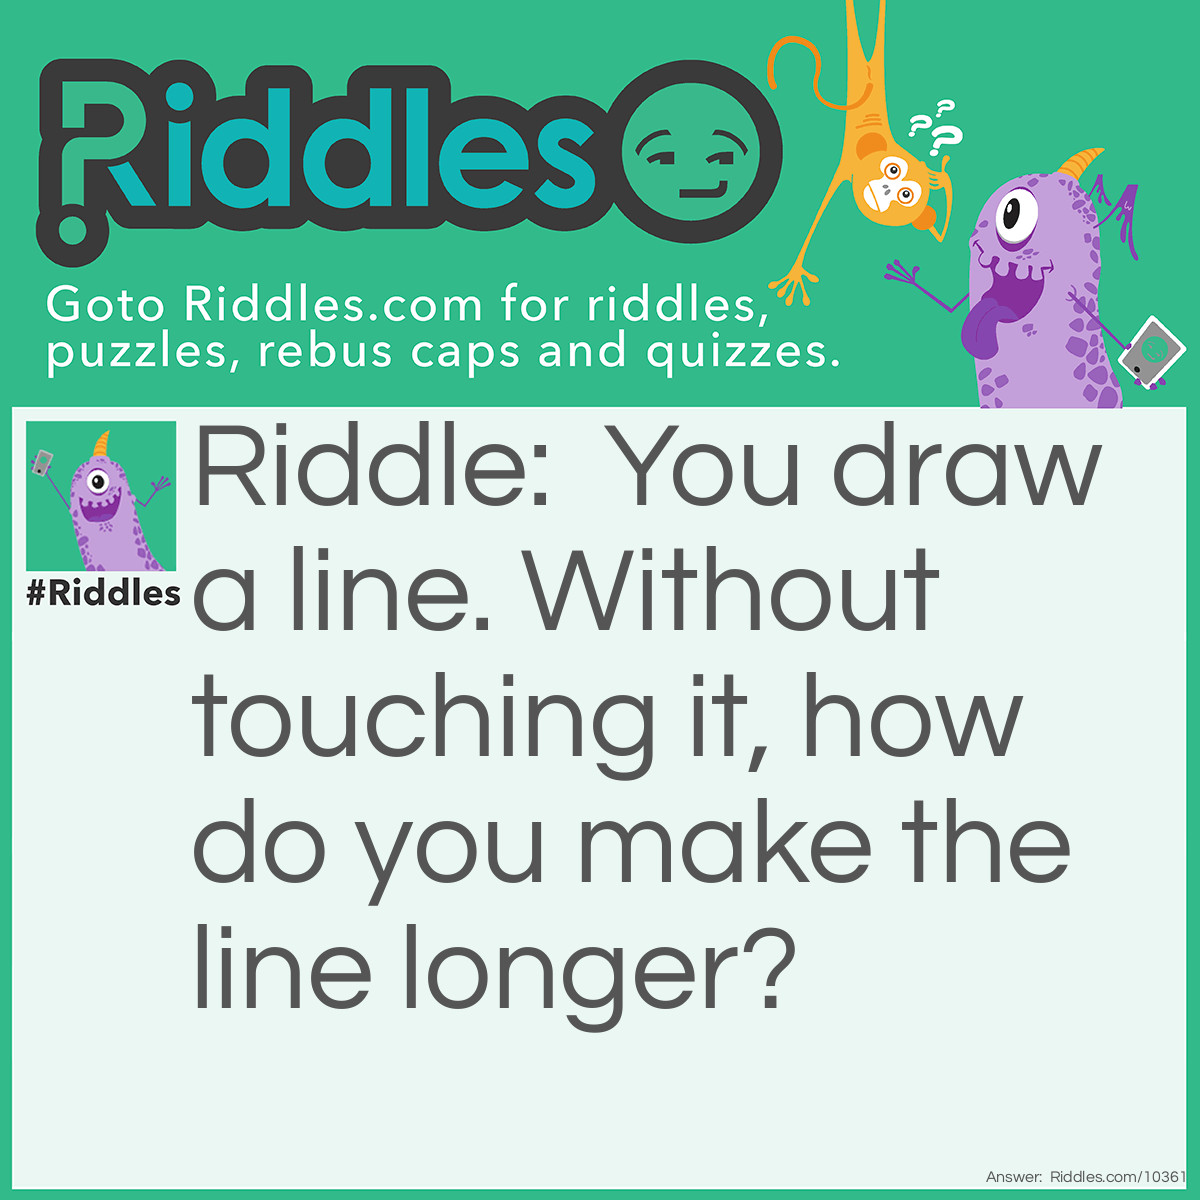 Riddle: You draw a line. Without touching it, how do you make the line longer? Answer: You draw a shorter line next to it, and then it becomes the longer line.